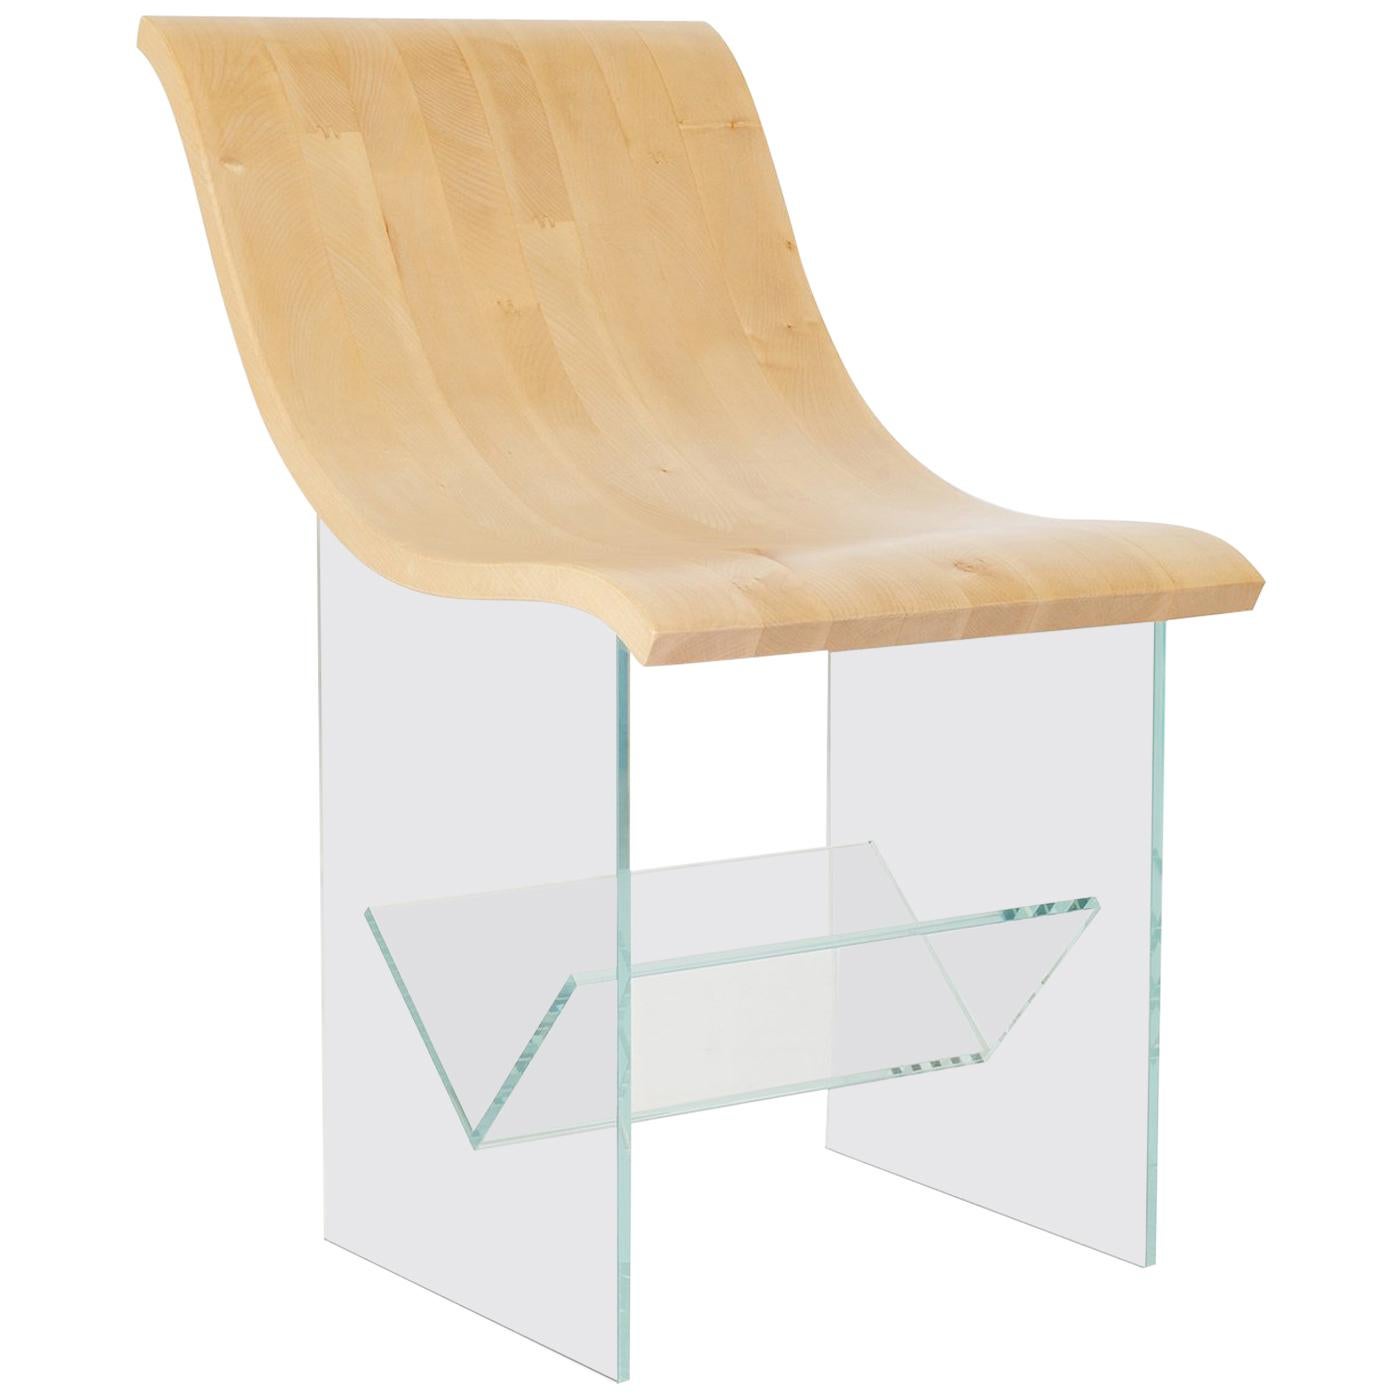 Synnefo Chair